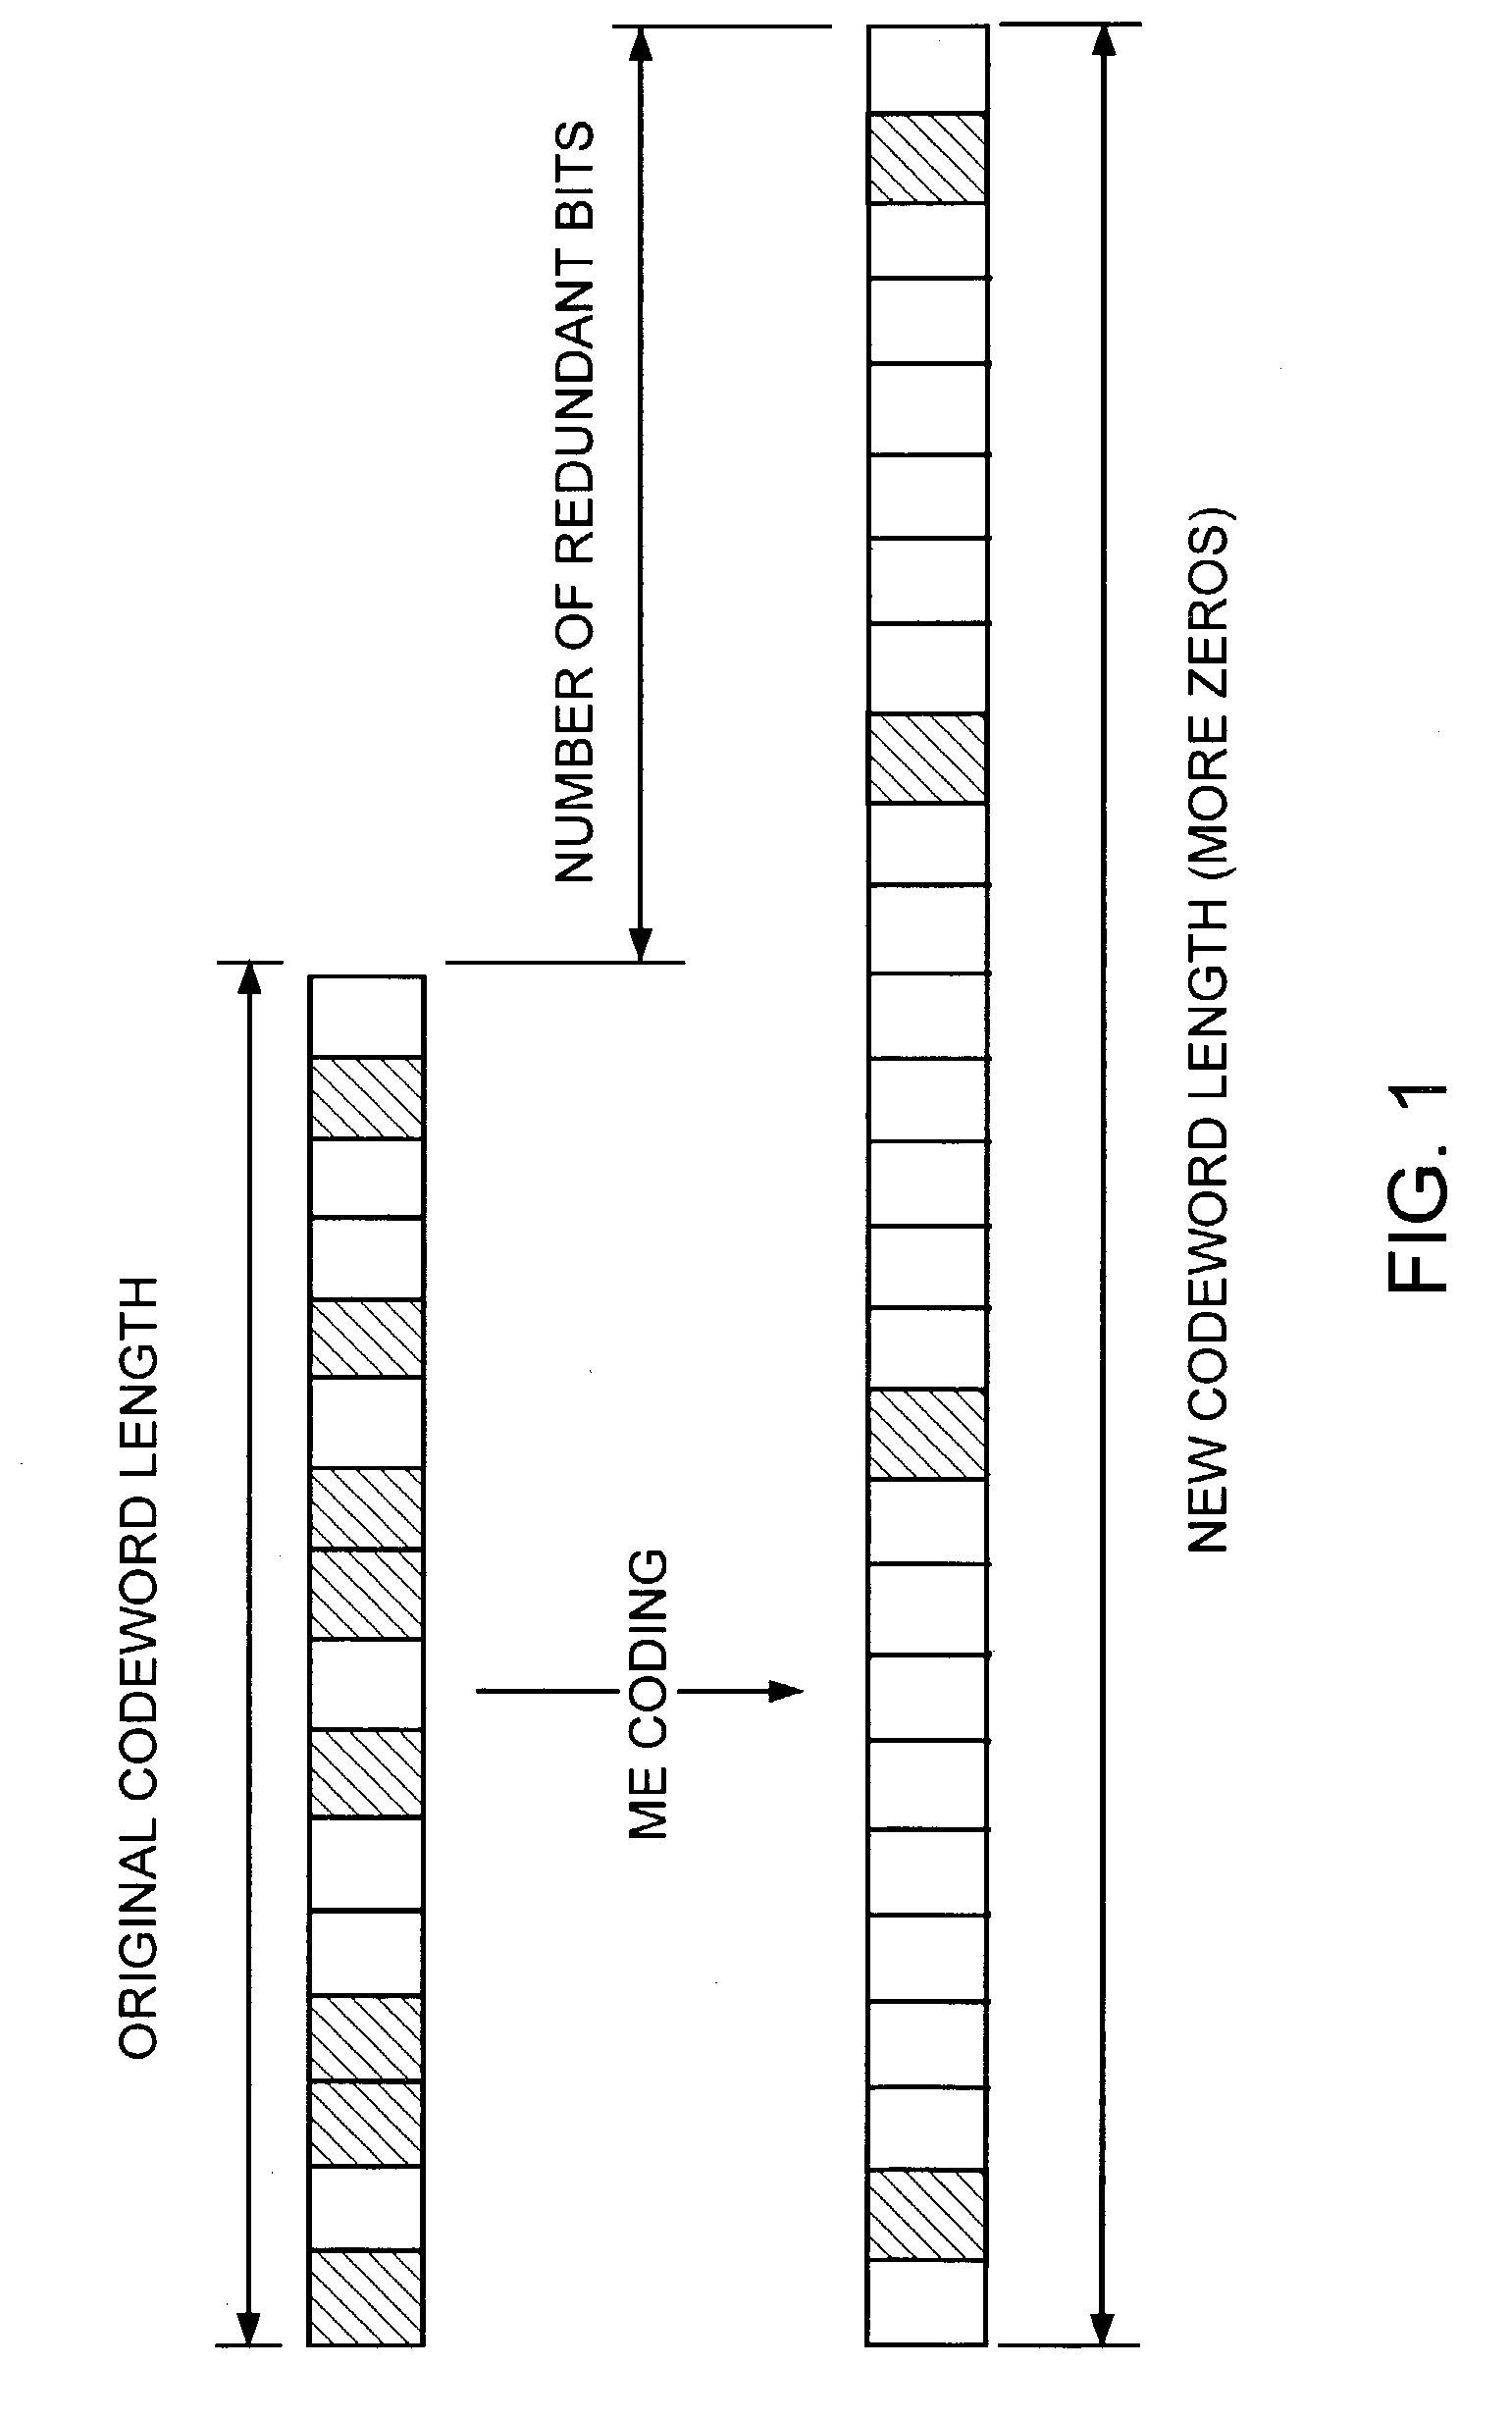 Source coding for interference reduction